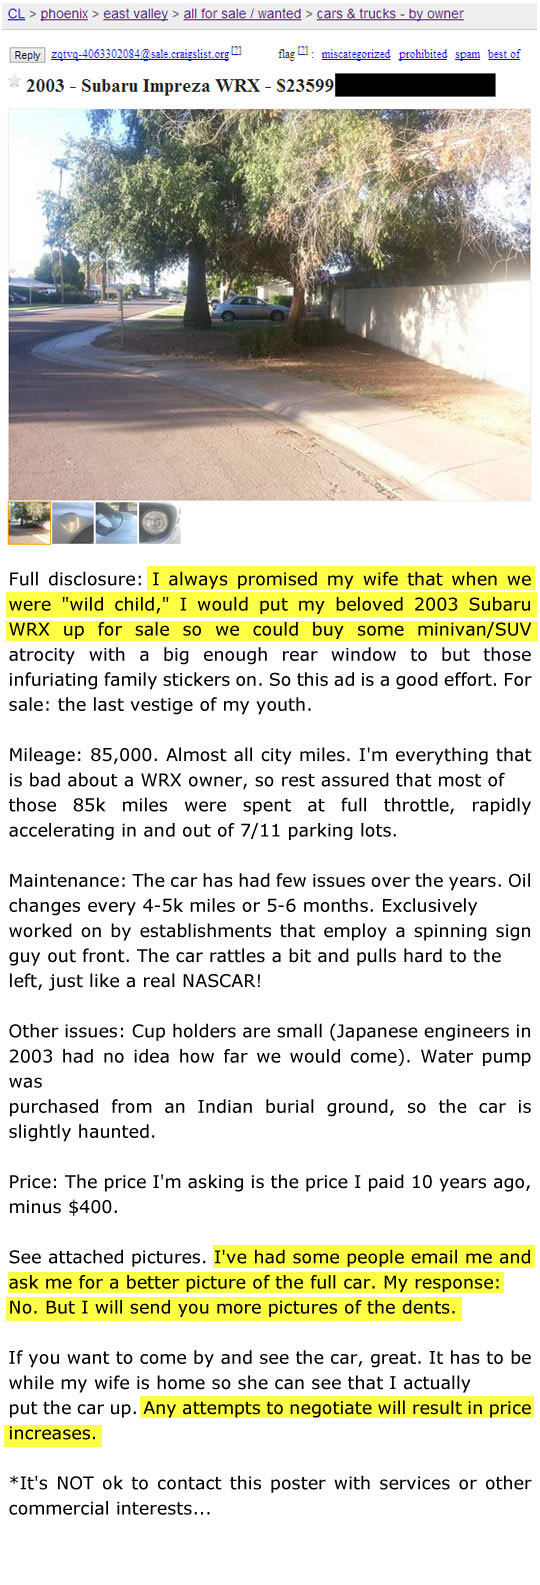 Man doesn’t want to sell his Subaru…